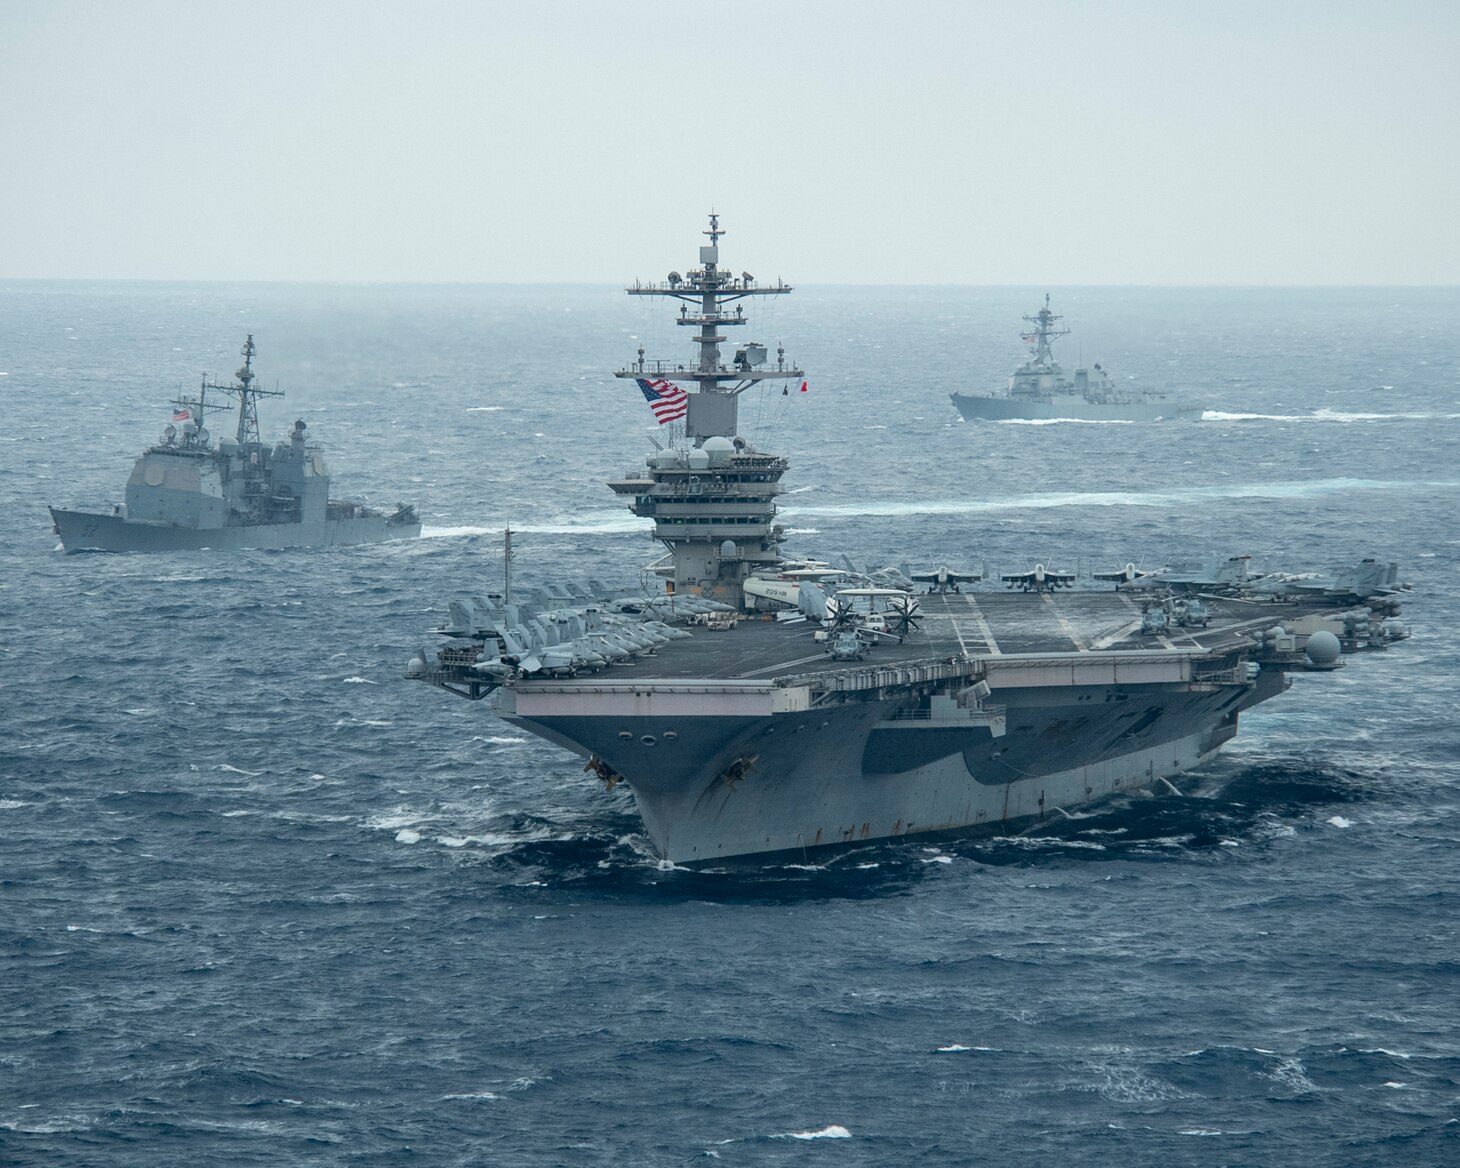 PACIFIC OCEAN (Jan. 15, 2021) – The aircraft carrier USS Theodore Roosevelt (CVN 71), front, Ticonderoga-class guided-missile cruiser USS Bunker Hill (CG 52), left, and Arleigh Burke-class guided-missile destroyer USS John Finn (DDG 113) transit the Pacific Ocean Jan. 15, 2021. The Theodore Roosevelt Carrier Strike Group is on a scheduled deployment to the U.S. 7th Fleet area of operations. As the U.S. Navy's largest forward deployed fleet, with its approximate 50-70 ships and submarines, 140 aircraft, and 20,000 Sailors in the area of operations at any given time, 7th Fleet conducts forward-deployed naval operations in support of U.S. national interests throughout a free and open Indo-Pacific area of operations to foster maritime security, promote stability, and prevent conflict alongside 35 other maritime nations and partners. (U.S. Navy photo by Mass Communication Specialist 2nd Class Casey Scoular)